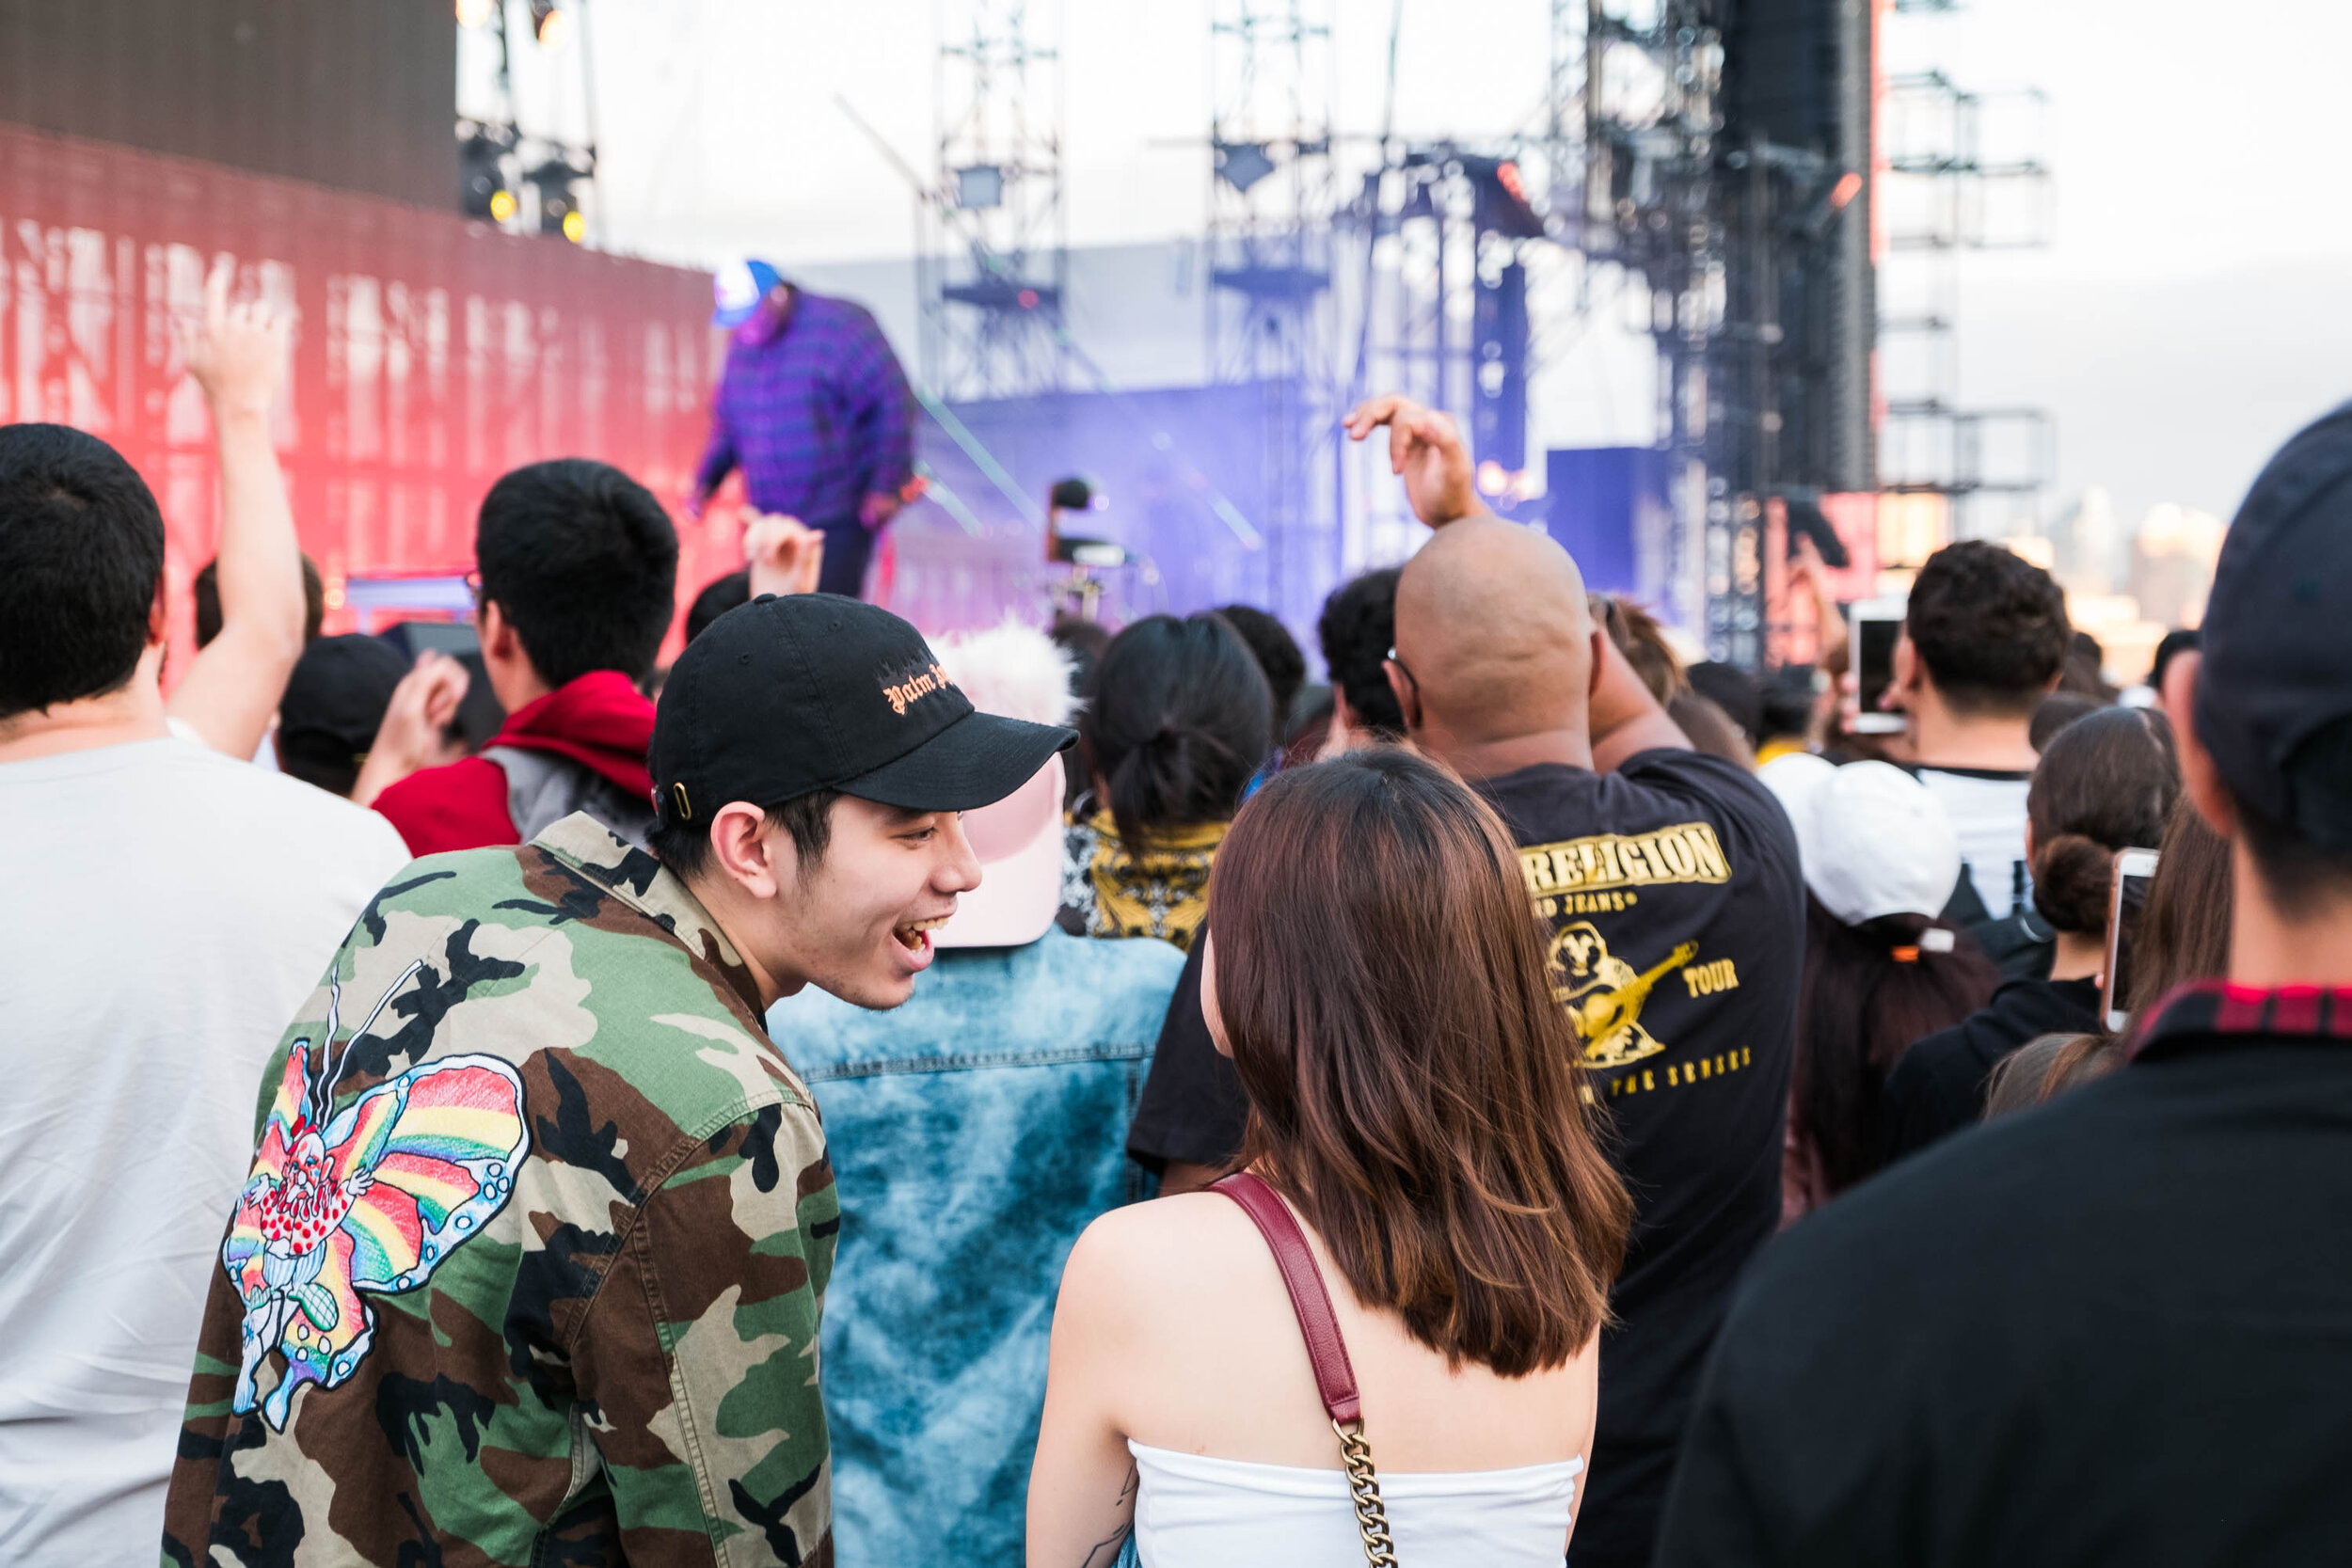  The concert started slow as the streetwear-clad attendees filed in and 88Rising’s newest artists ran through abbreviated set lists. 